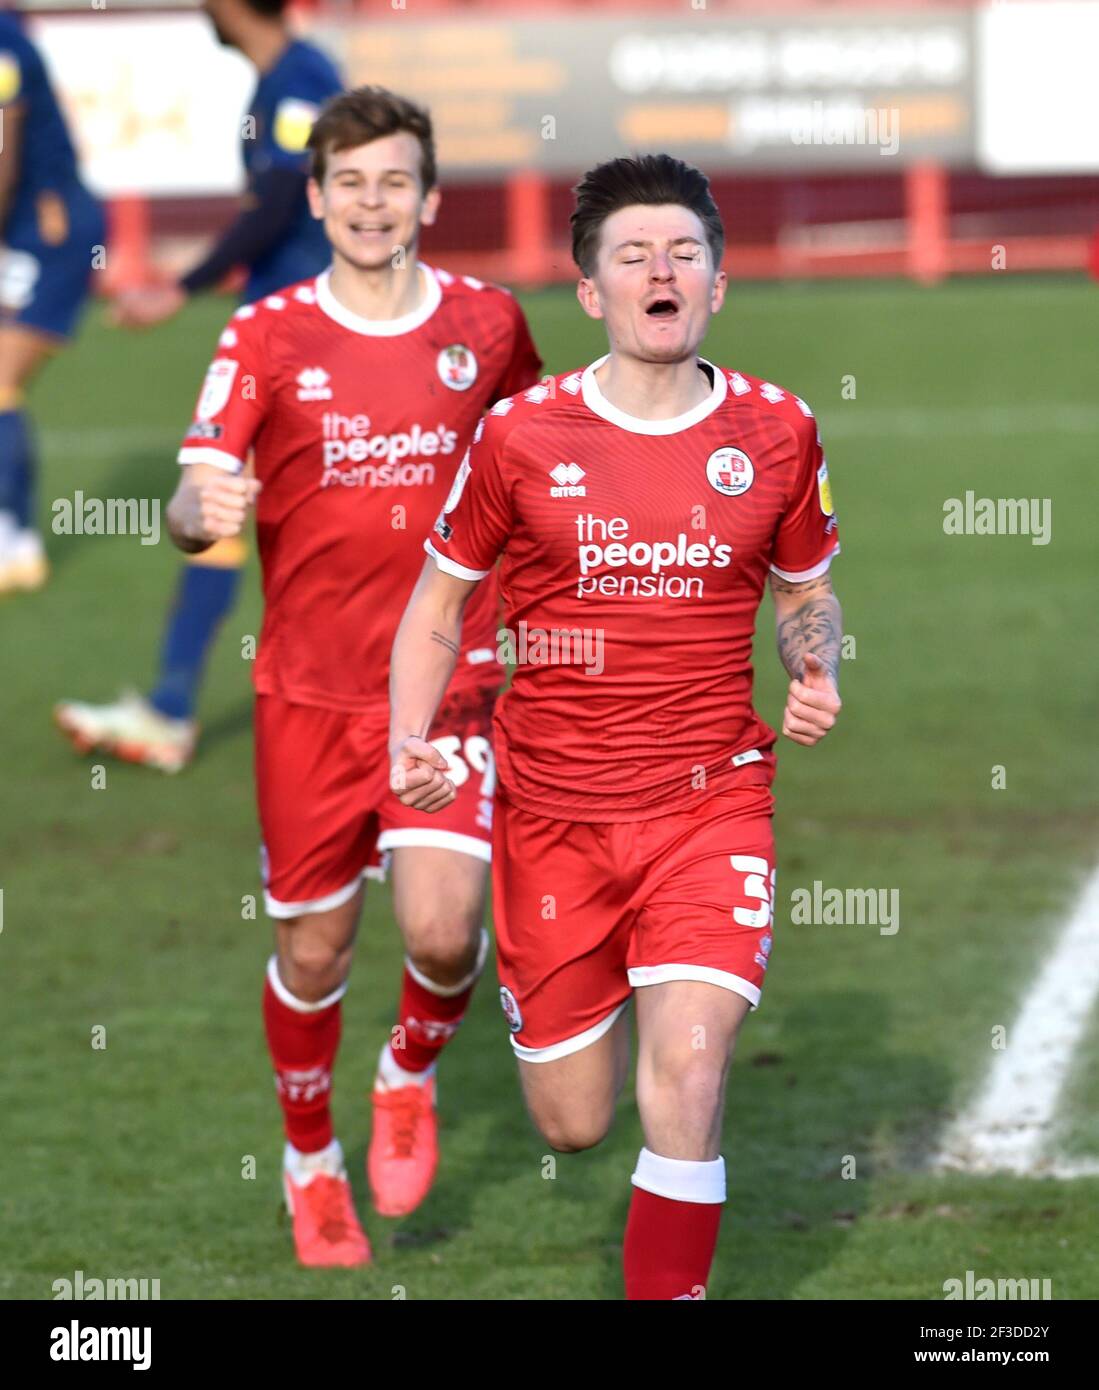 James Tilley of Crawley celebrates after scoring their late winner during the Sky Bet League Two match between Crawley Town and Mansfield Town at the People's Pension Stadium   , Crawley ,  UK - 13th March 2021 Photo Simon Dack / Telephoto Images.  - Editorial use only. No merchandising. For Football images FA and Premier League restrictions apply inc. no internet/mobile usage without FAPL license - for details contact Football Dataco Stock Photo